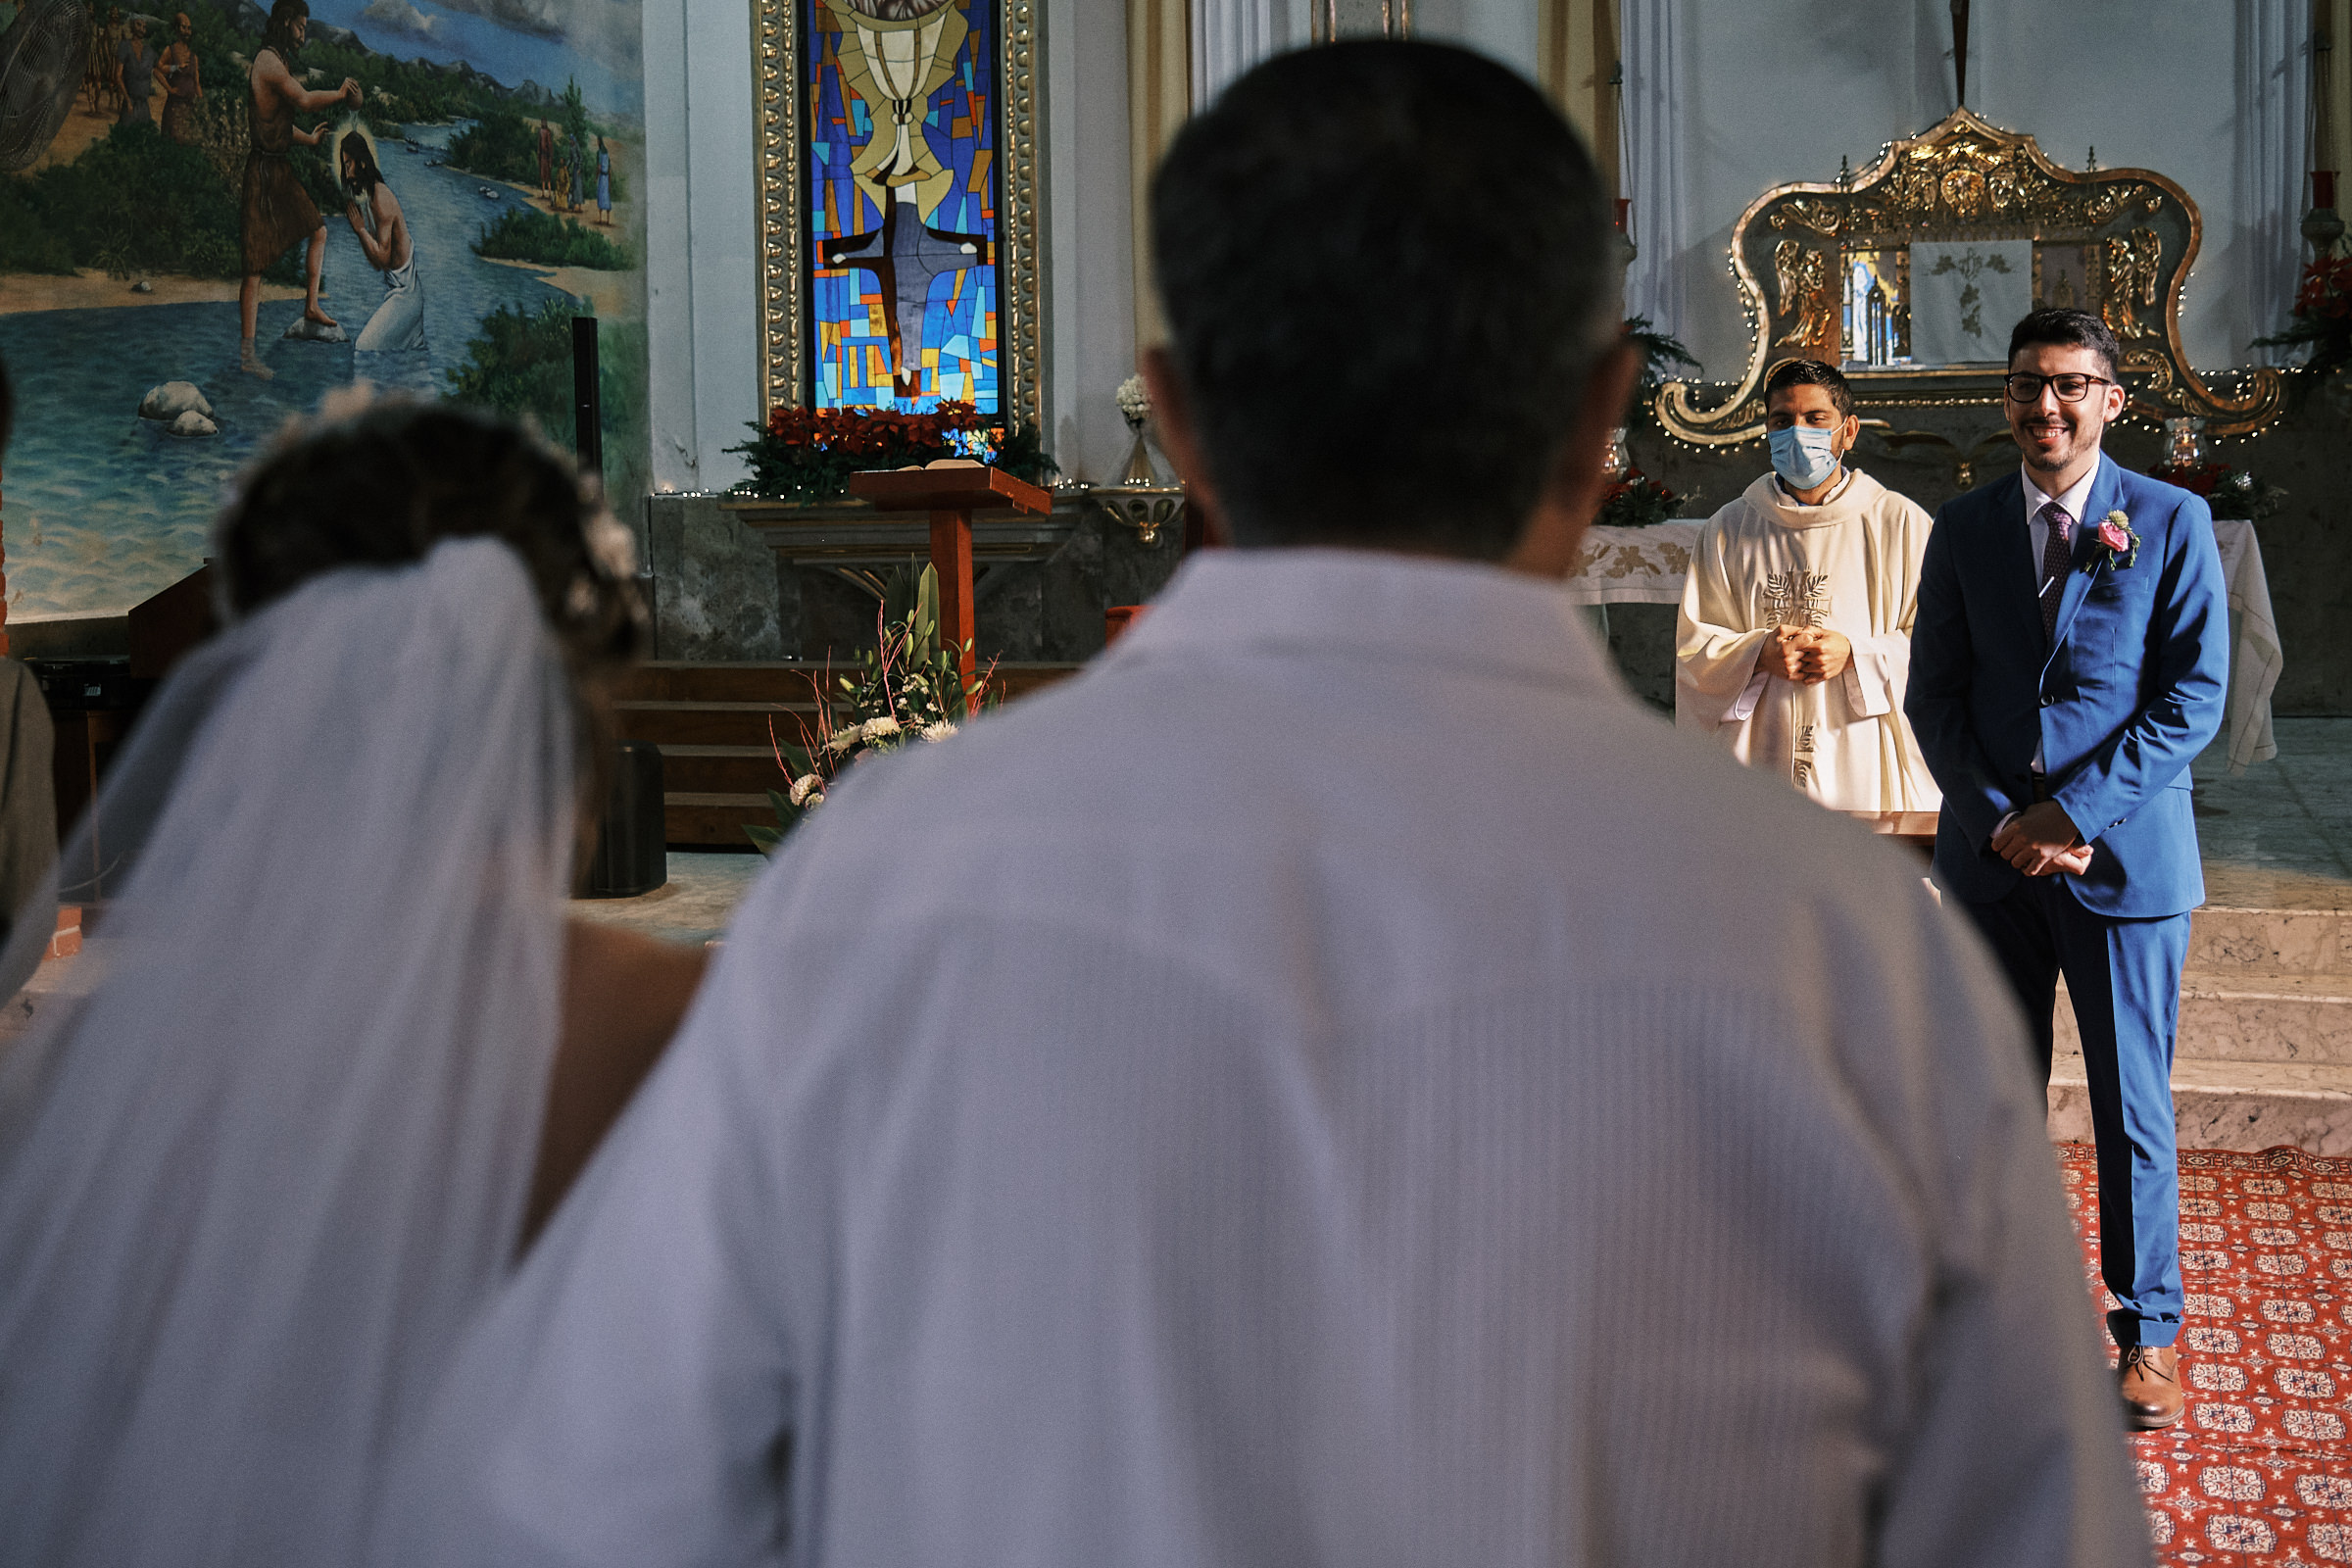 Groom Awaits For The Bride And Looks At Her As She Walks The Aisle In Catholic Ceremony